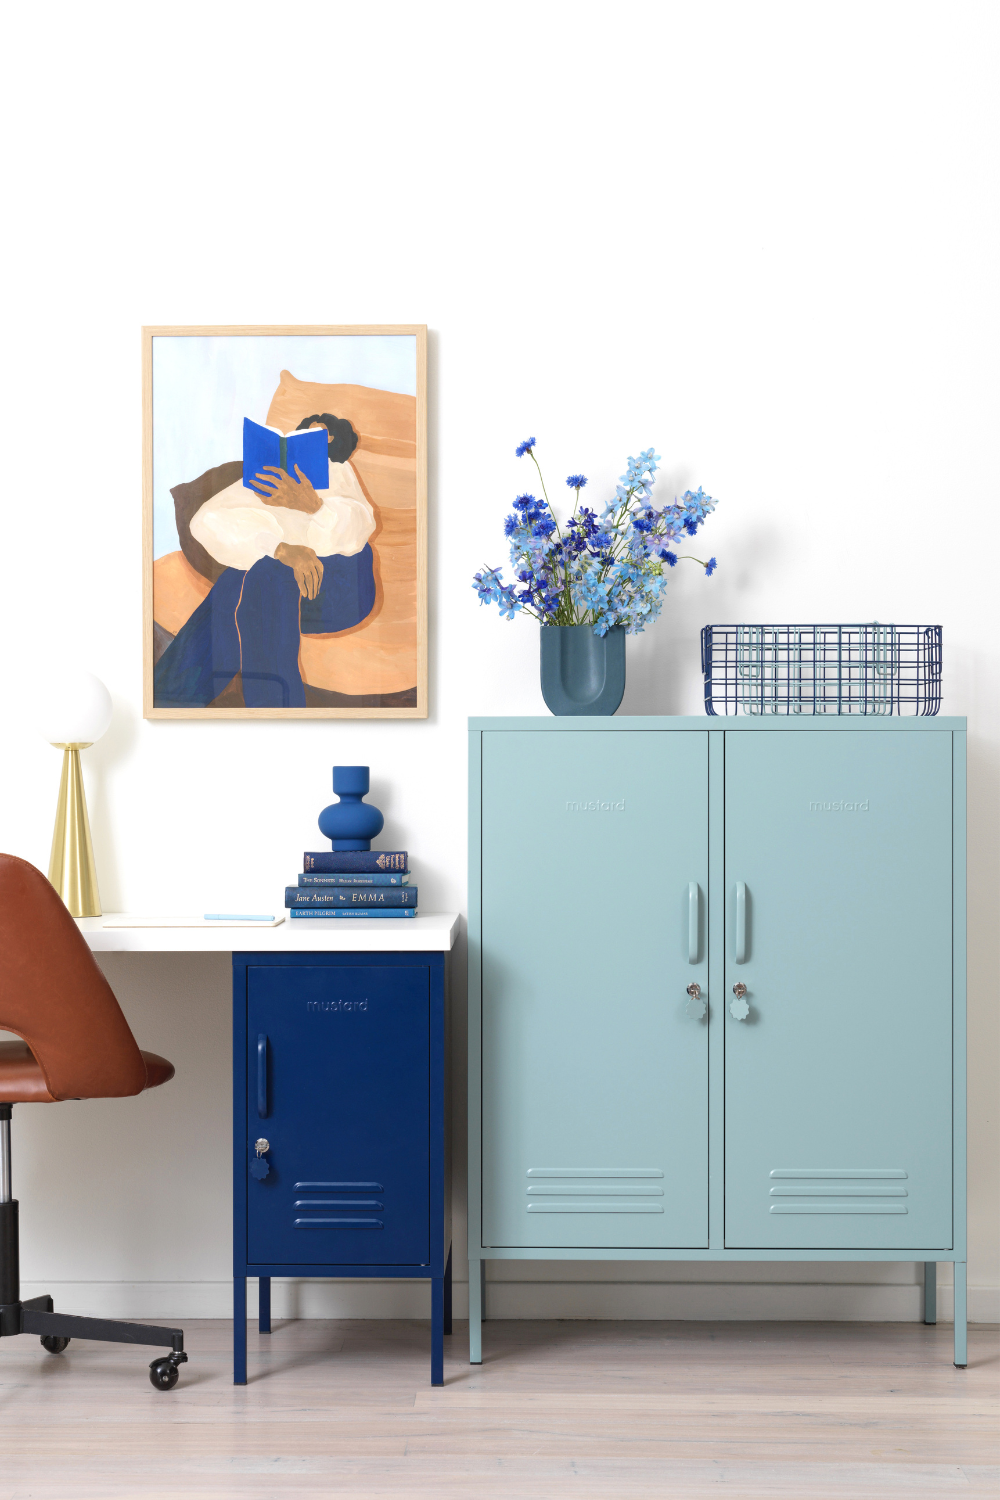 In a home office setup, an Ocean Midi is styled next to a desk with a Navy Shorty underneath it. There is a tonal artwork on the wall and a vase of blue flowers on top of the locker.